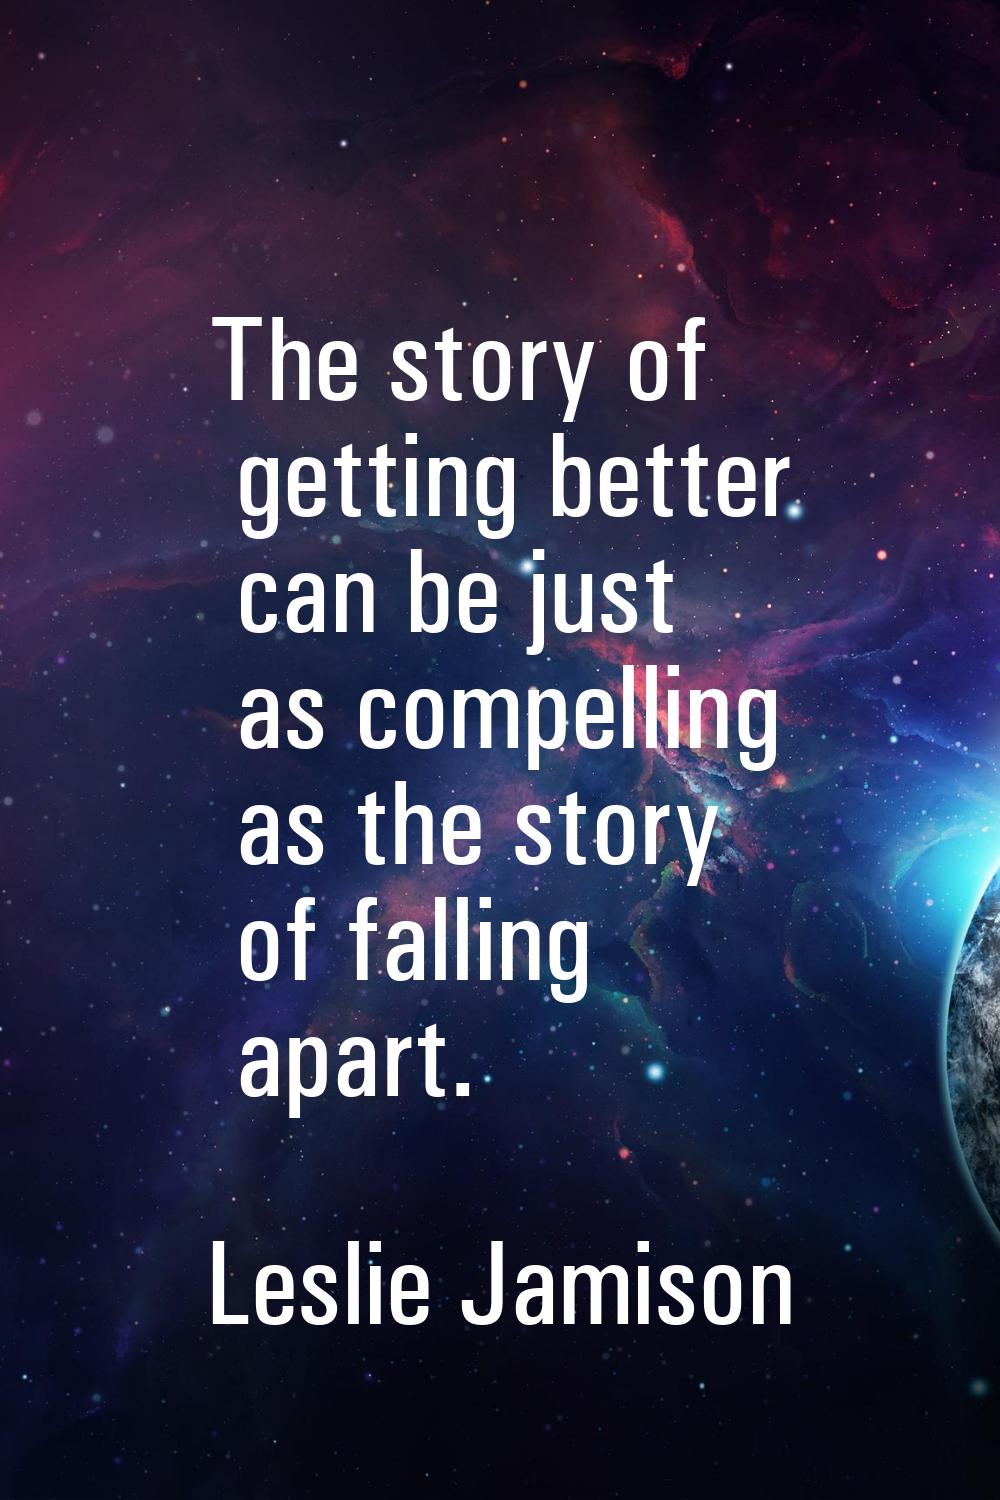 The story of getting better can be just as compelling as the story of falling apart.